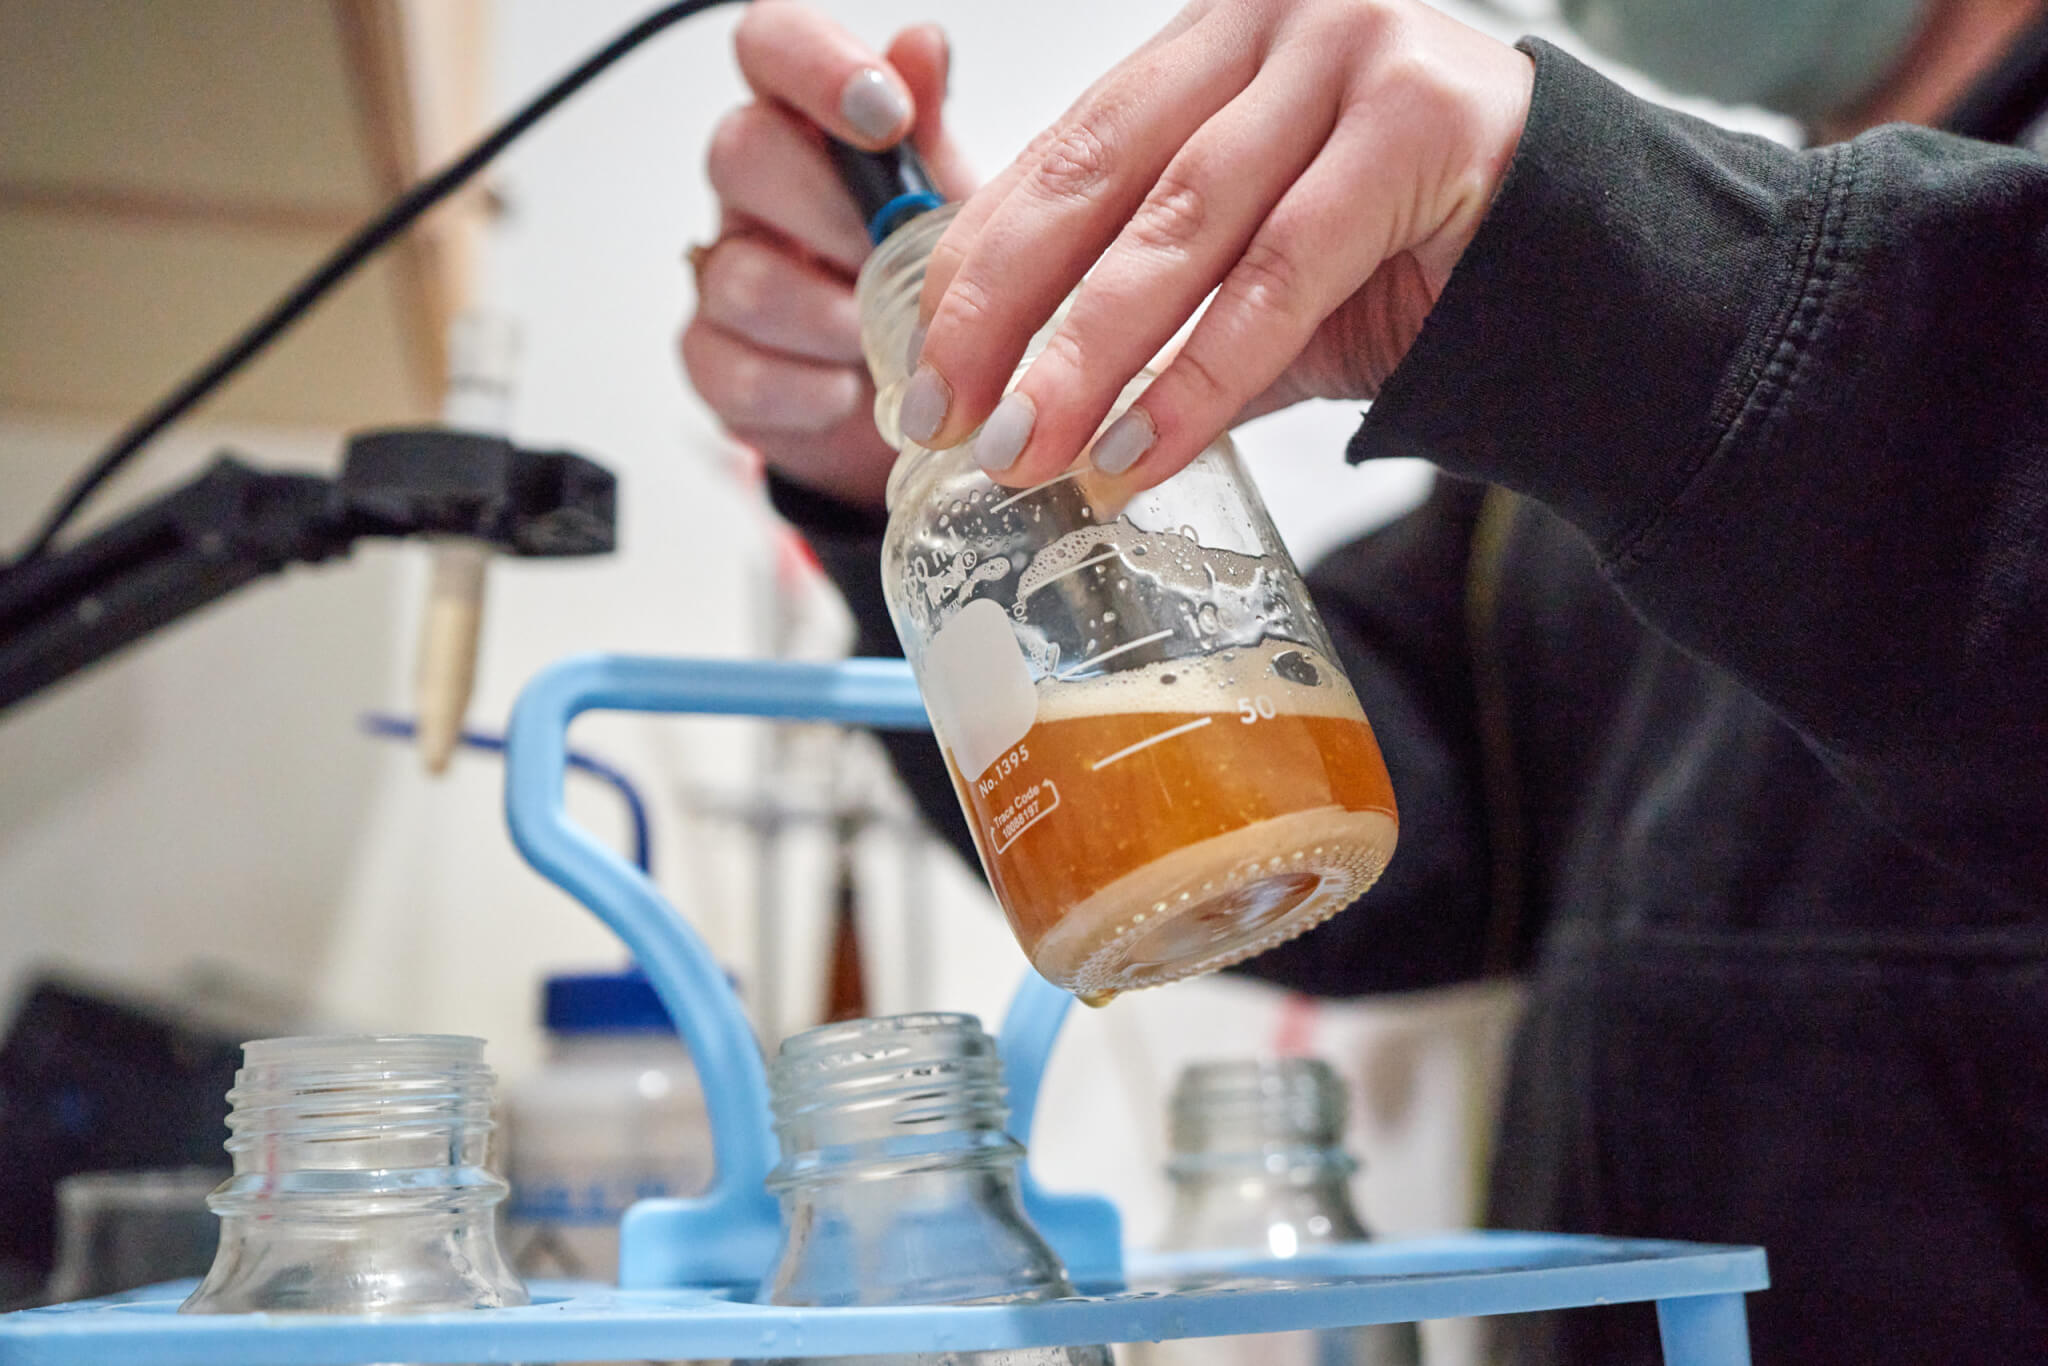 A lab technician measures out a sample of beer for analysis inside the Cigar City Brewing quality control lab.